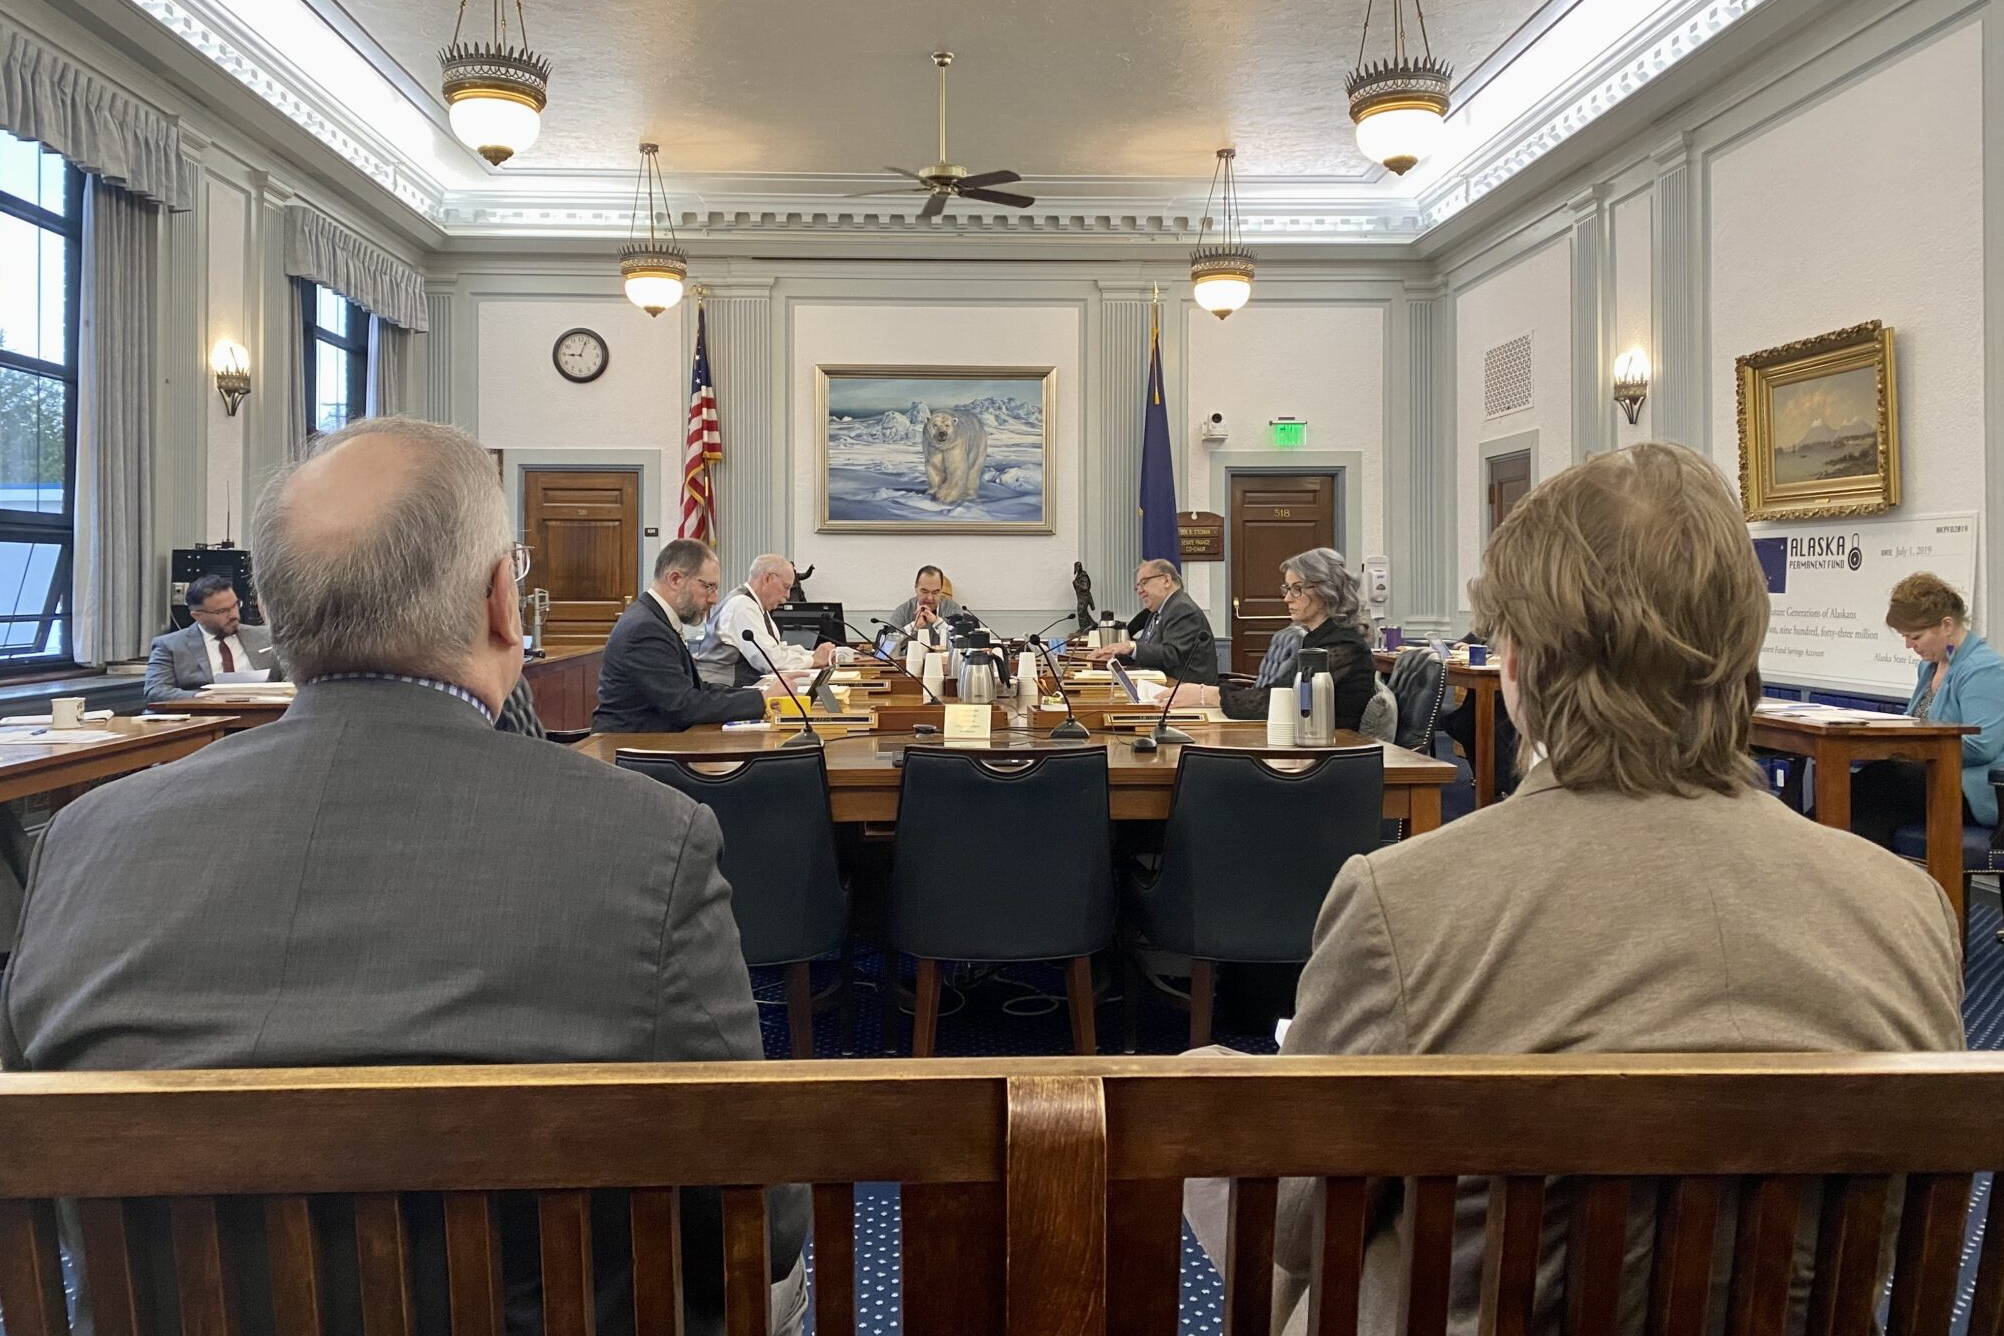 Rep. Bryce Edgmon, I-Dillingham, before presenting his bill that would increase internet speeds for rural Alaska schools to the Senate Finance Committee on Monday. (Claire Stremple/Alaska Beacon)